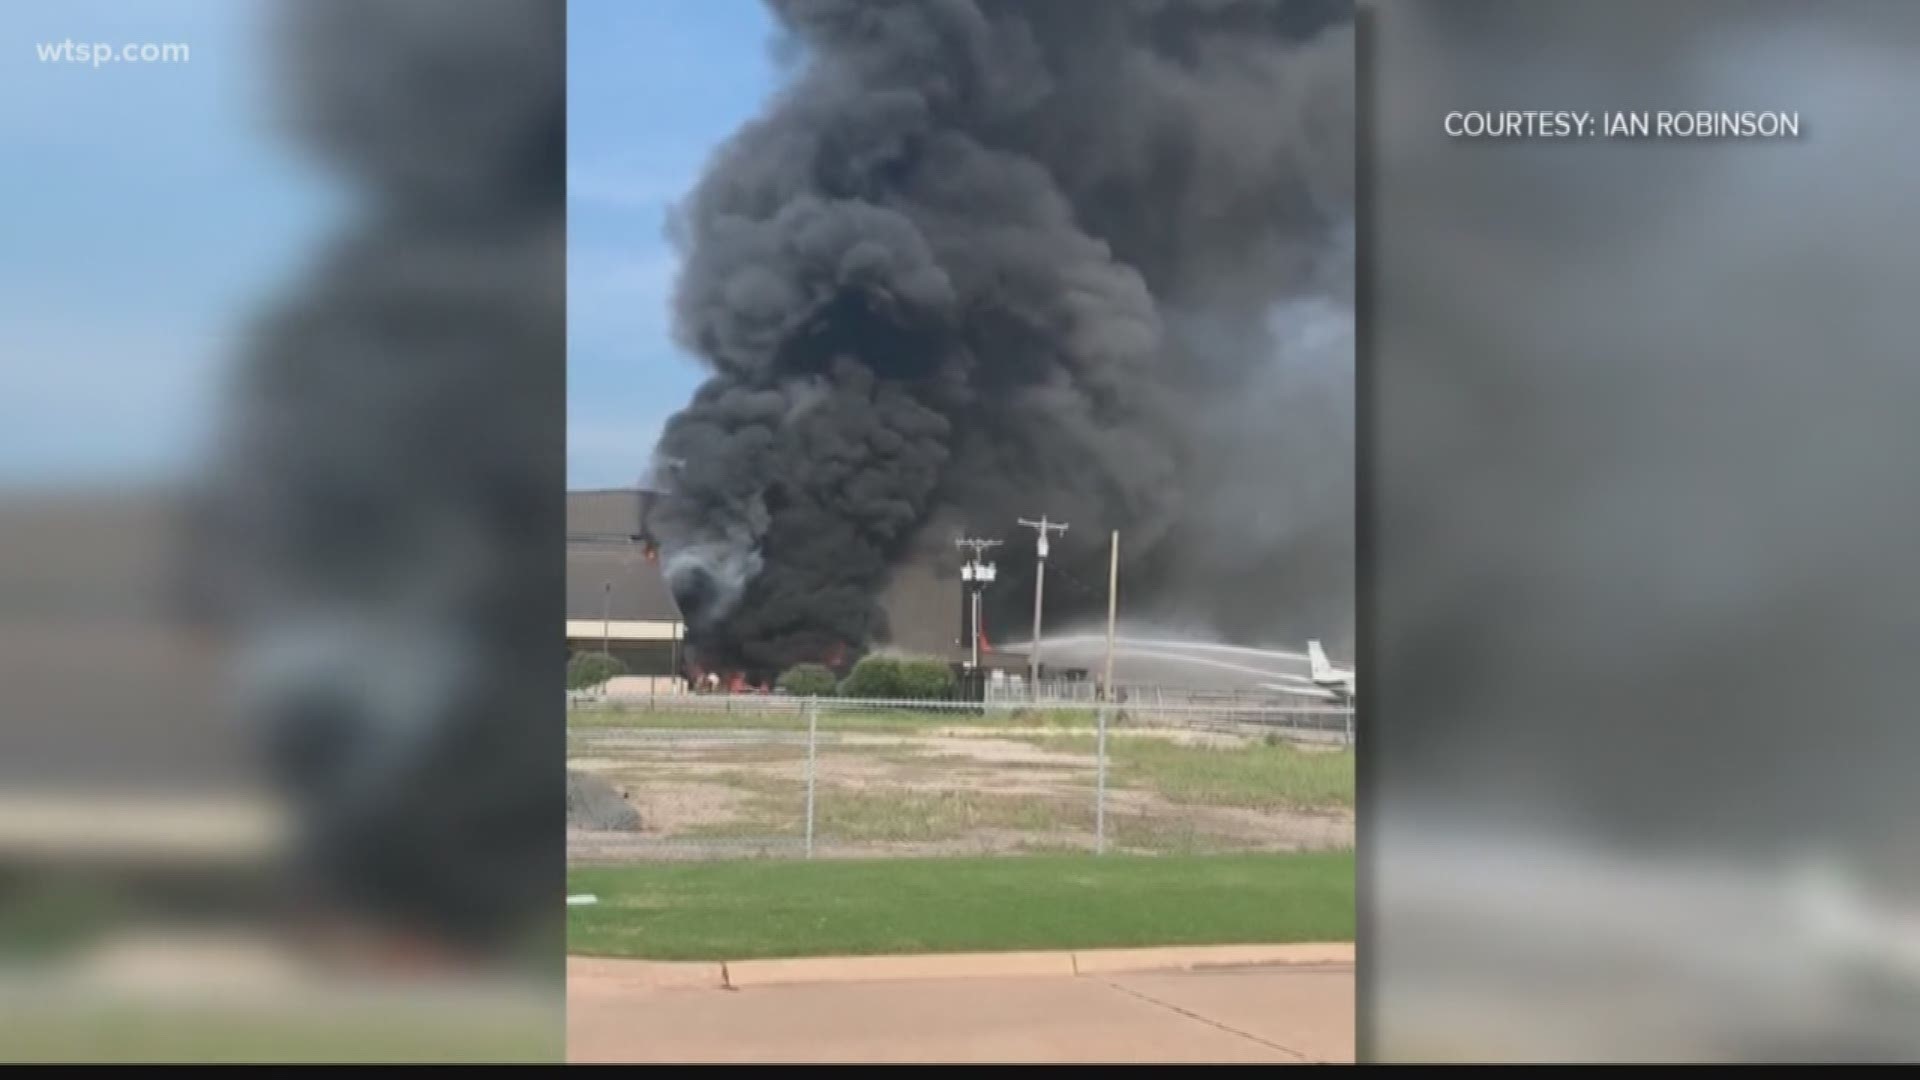 At least 10 people are dead after an airplane heading to St. Petersburg crashed suddenly Sunday in north Texas.

First responders say the twin-engine Beechcraft BE-350 King Air plane flew into a hangar shortly after takeoff around 9:10 a.m. from Addison Municipal Airport, which is located in the unincorporated town of Addison — immediately north of Dallas.

Officials say the aircraft then caught fire. There were no survivors aboard the plane. The hangar was unoccupied at the time of the crash.

The names of the victims have not been released. Authorities are trying to contact members of their families.